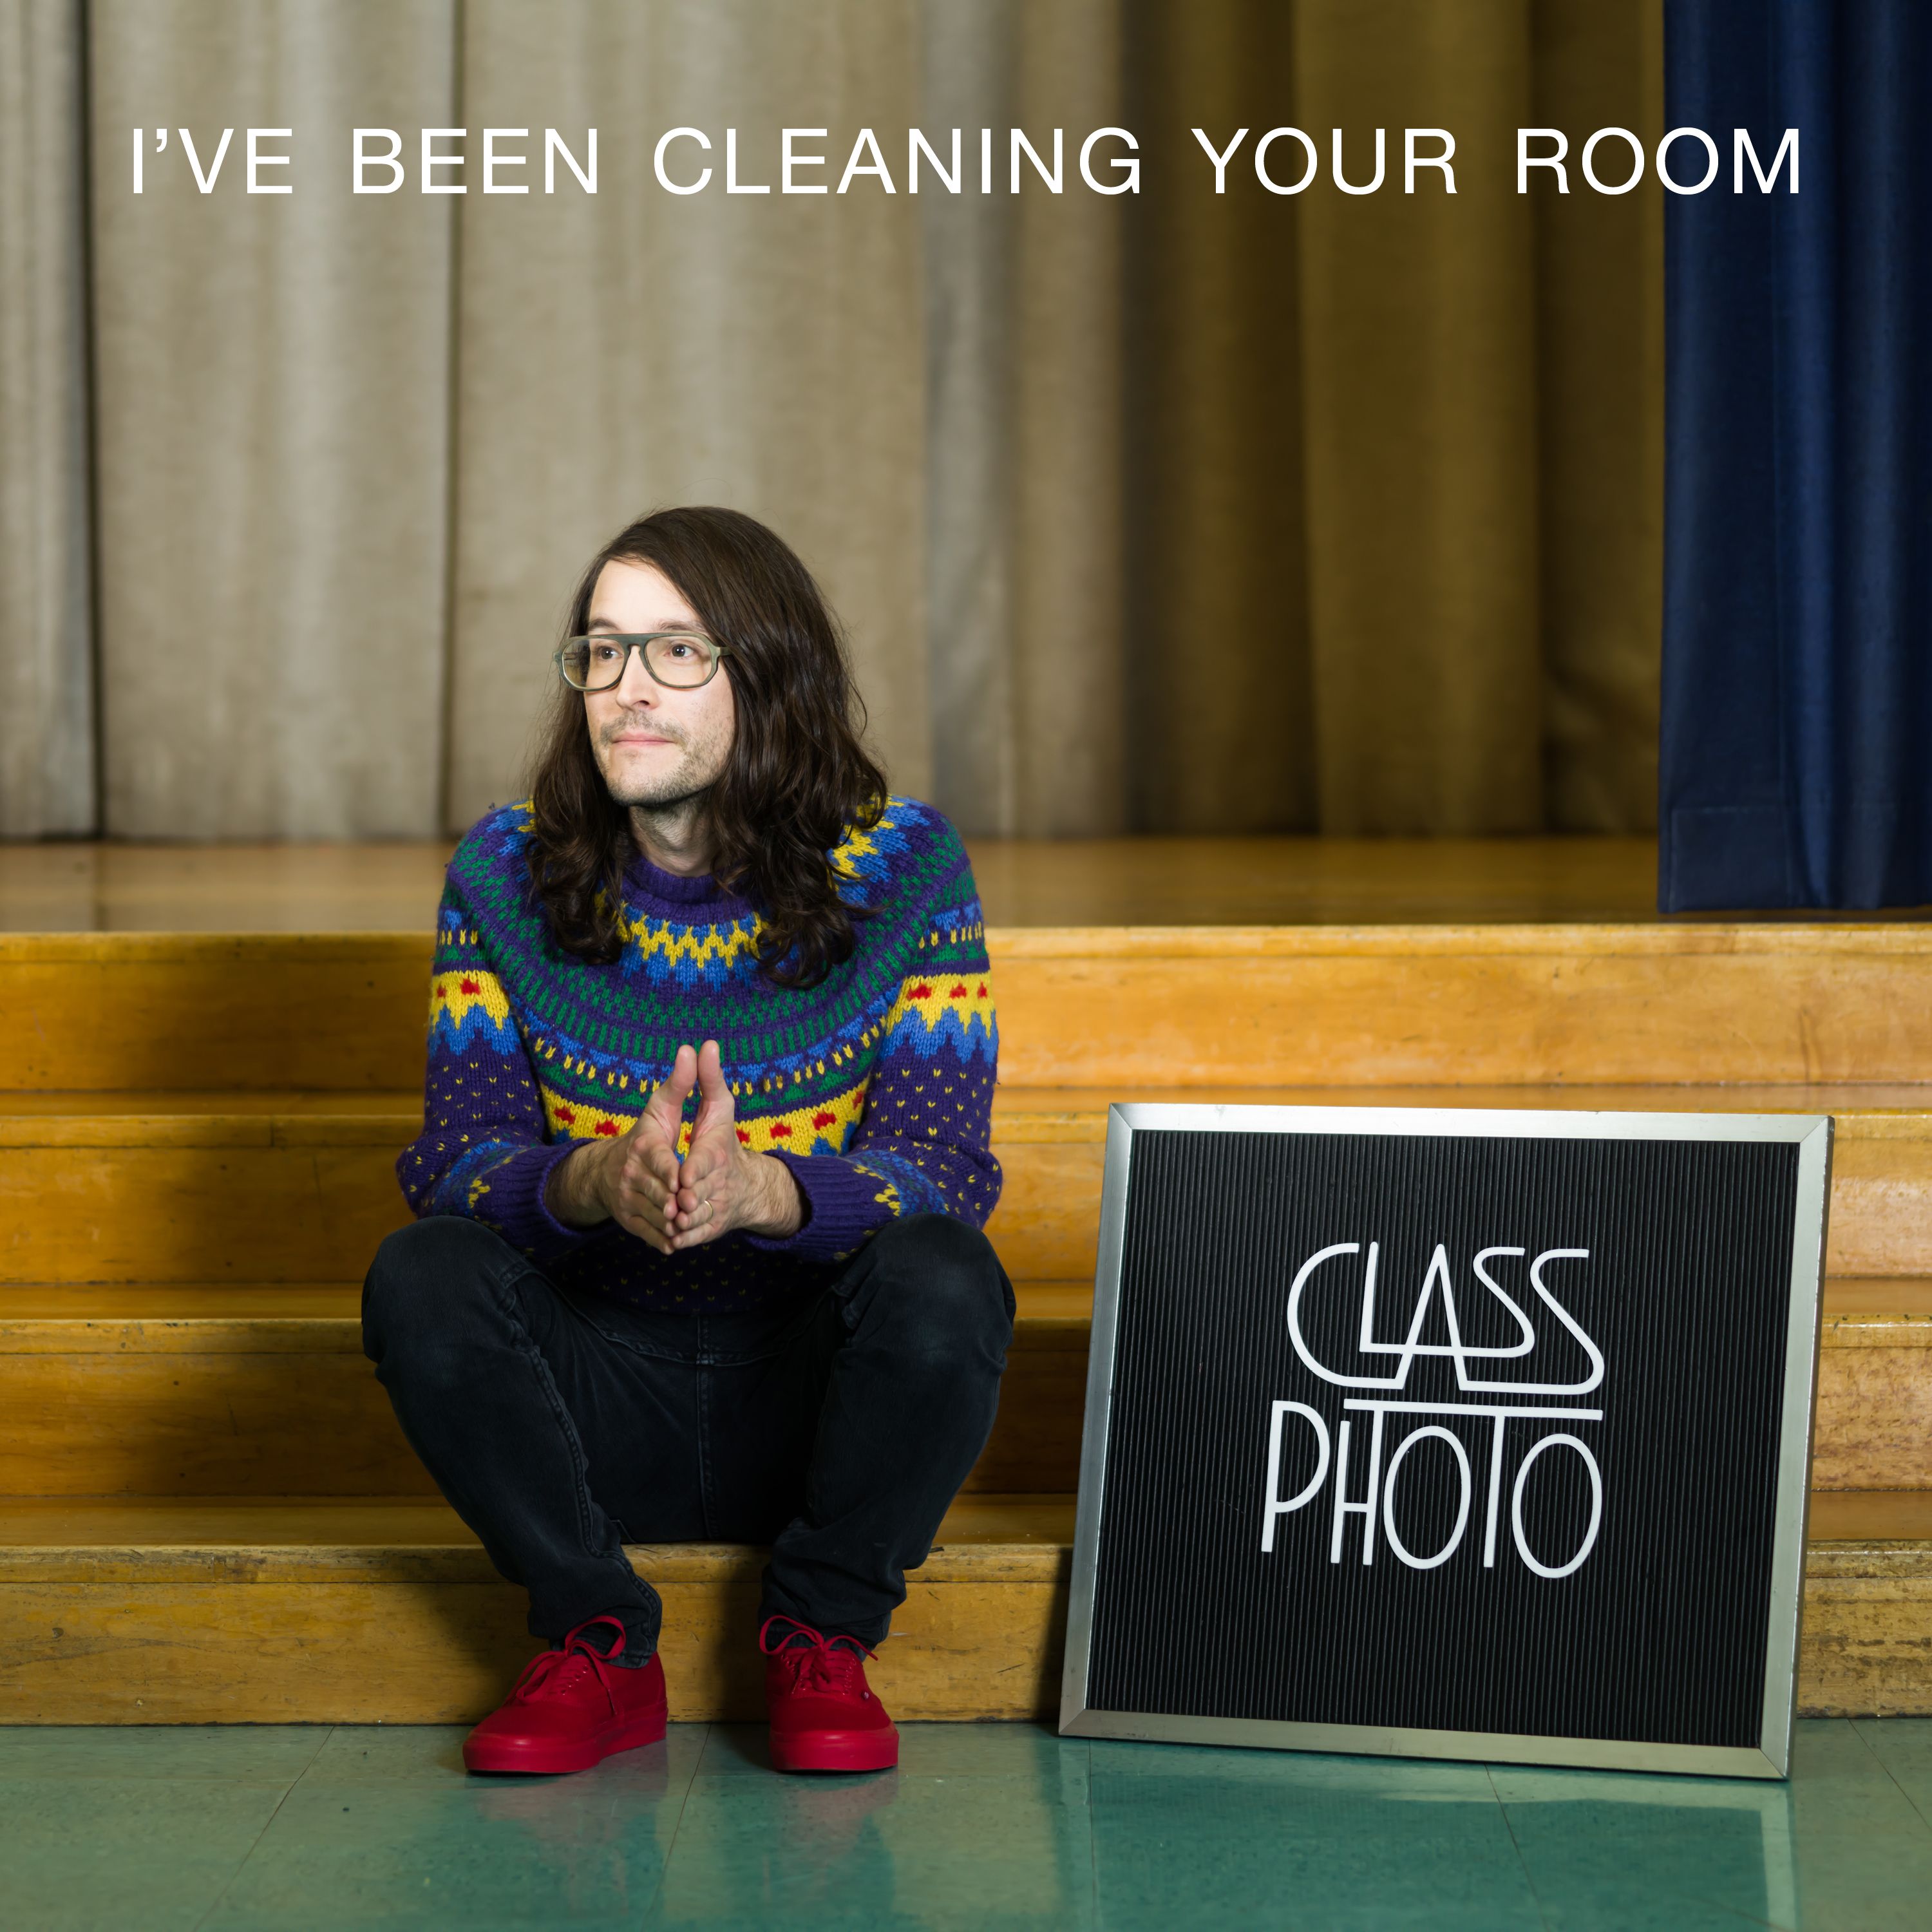 Class Photo – “I’ve Been Cleaning Your Room”